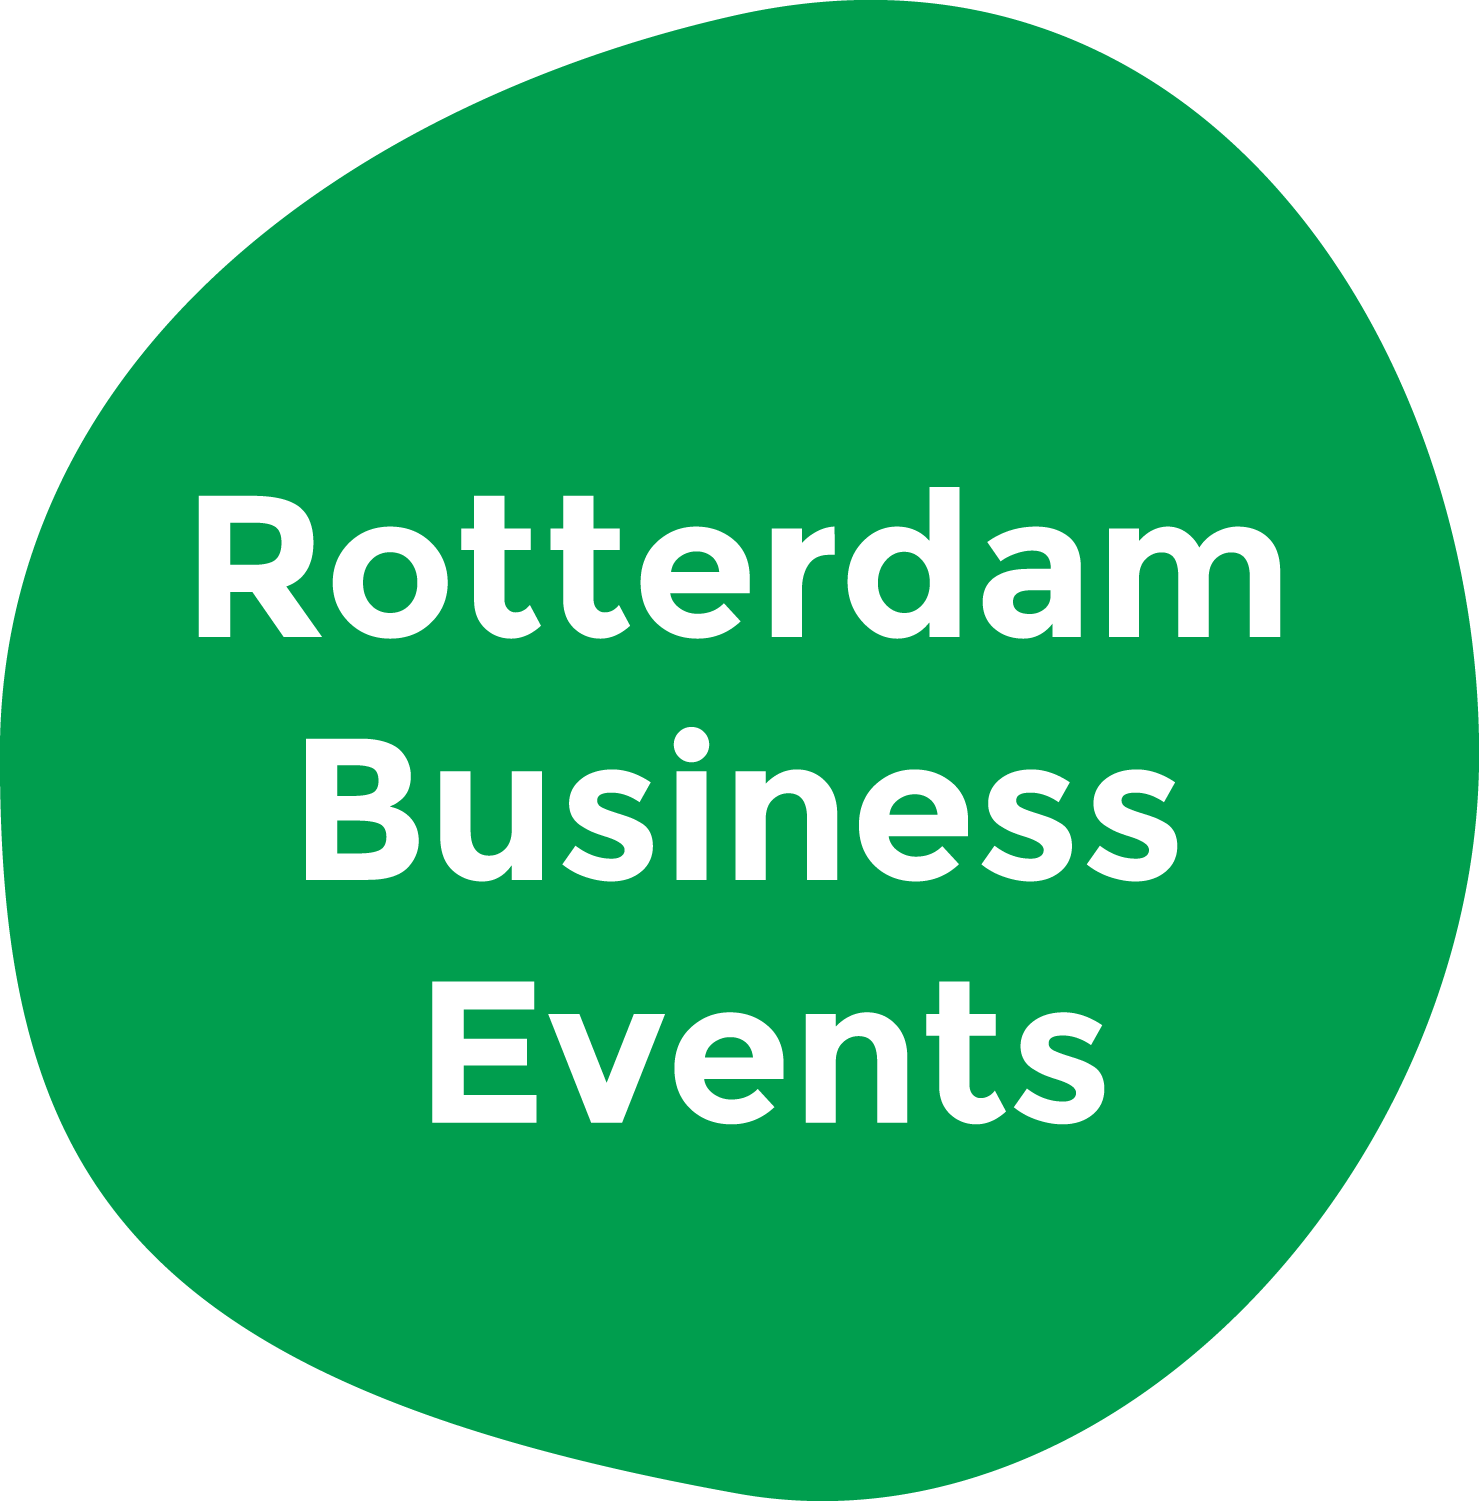 Rotterdam Business Events